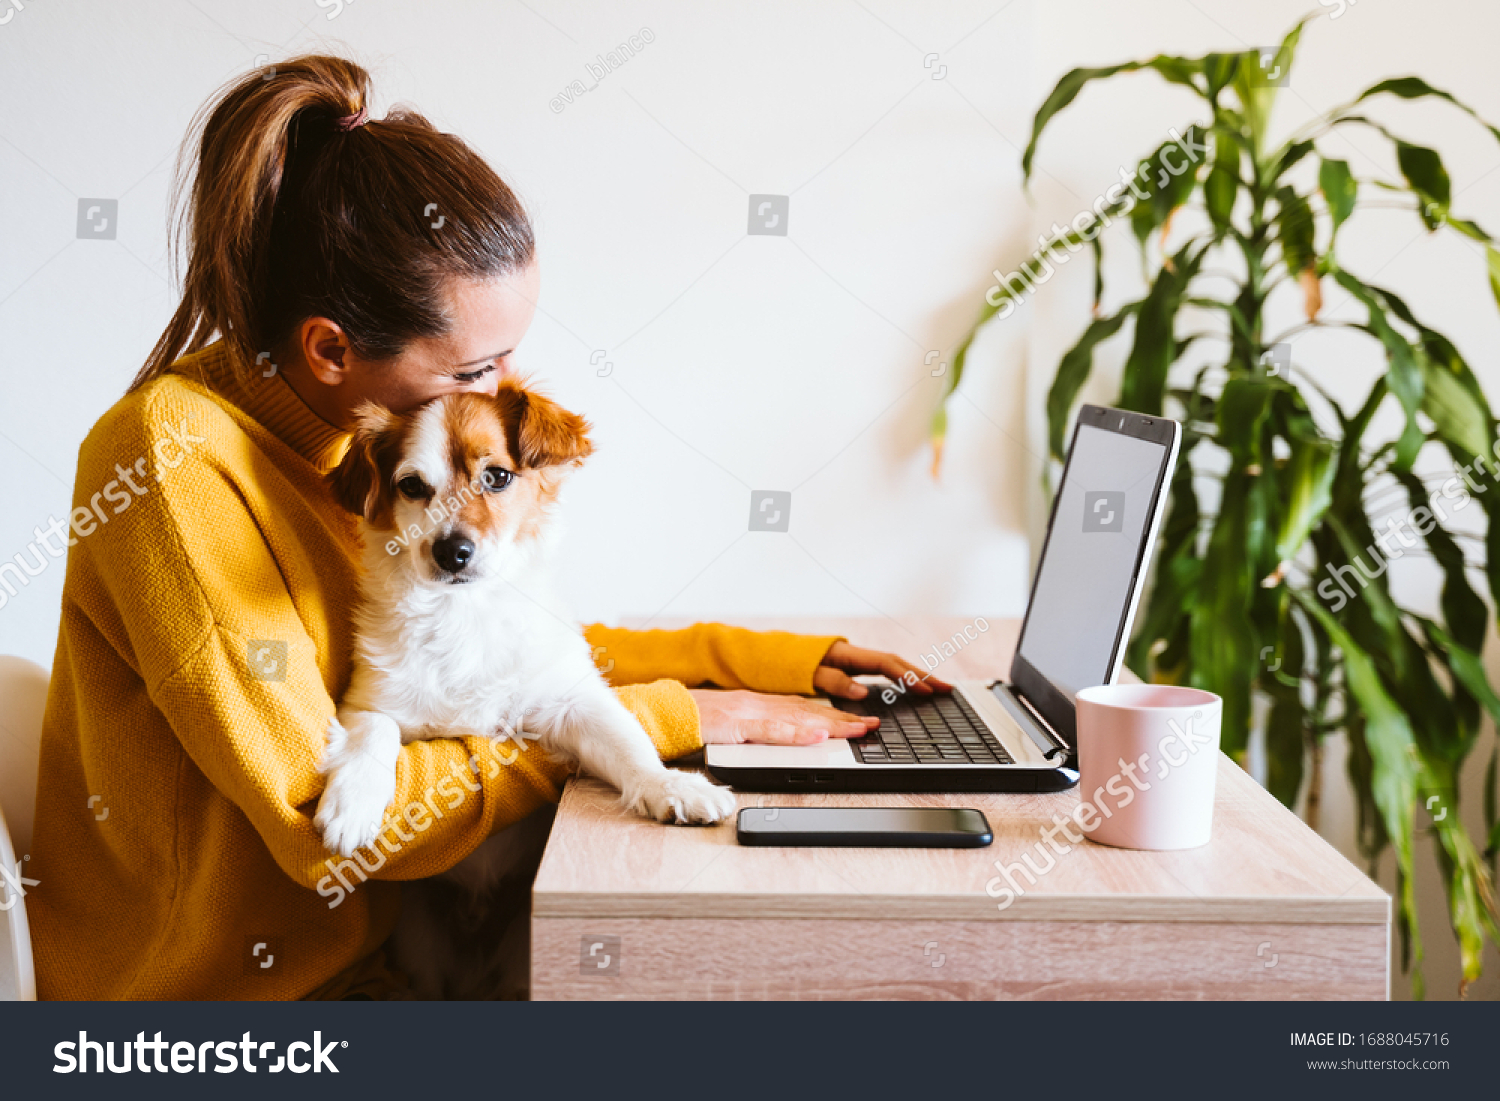 young woman working on laptop at home,cute small dog besides. work from home, stay safe during coronavirus covid-2019 concpt #1688045716